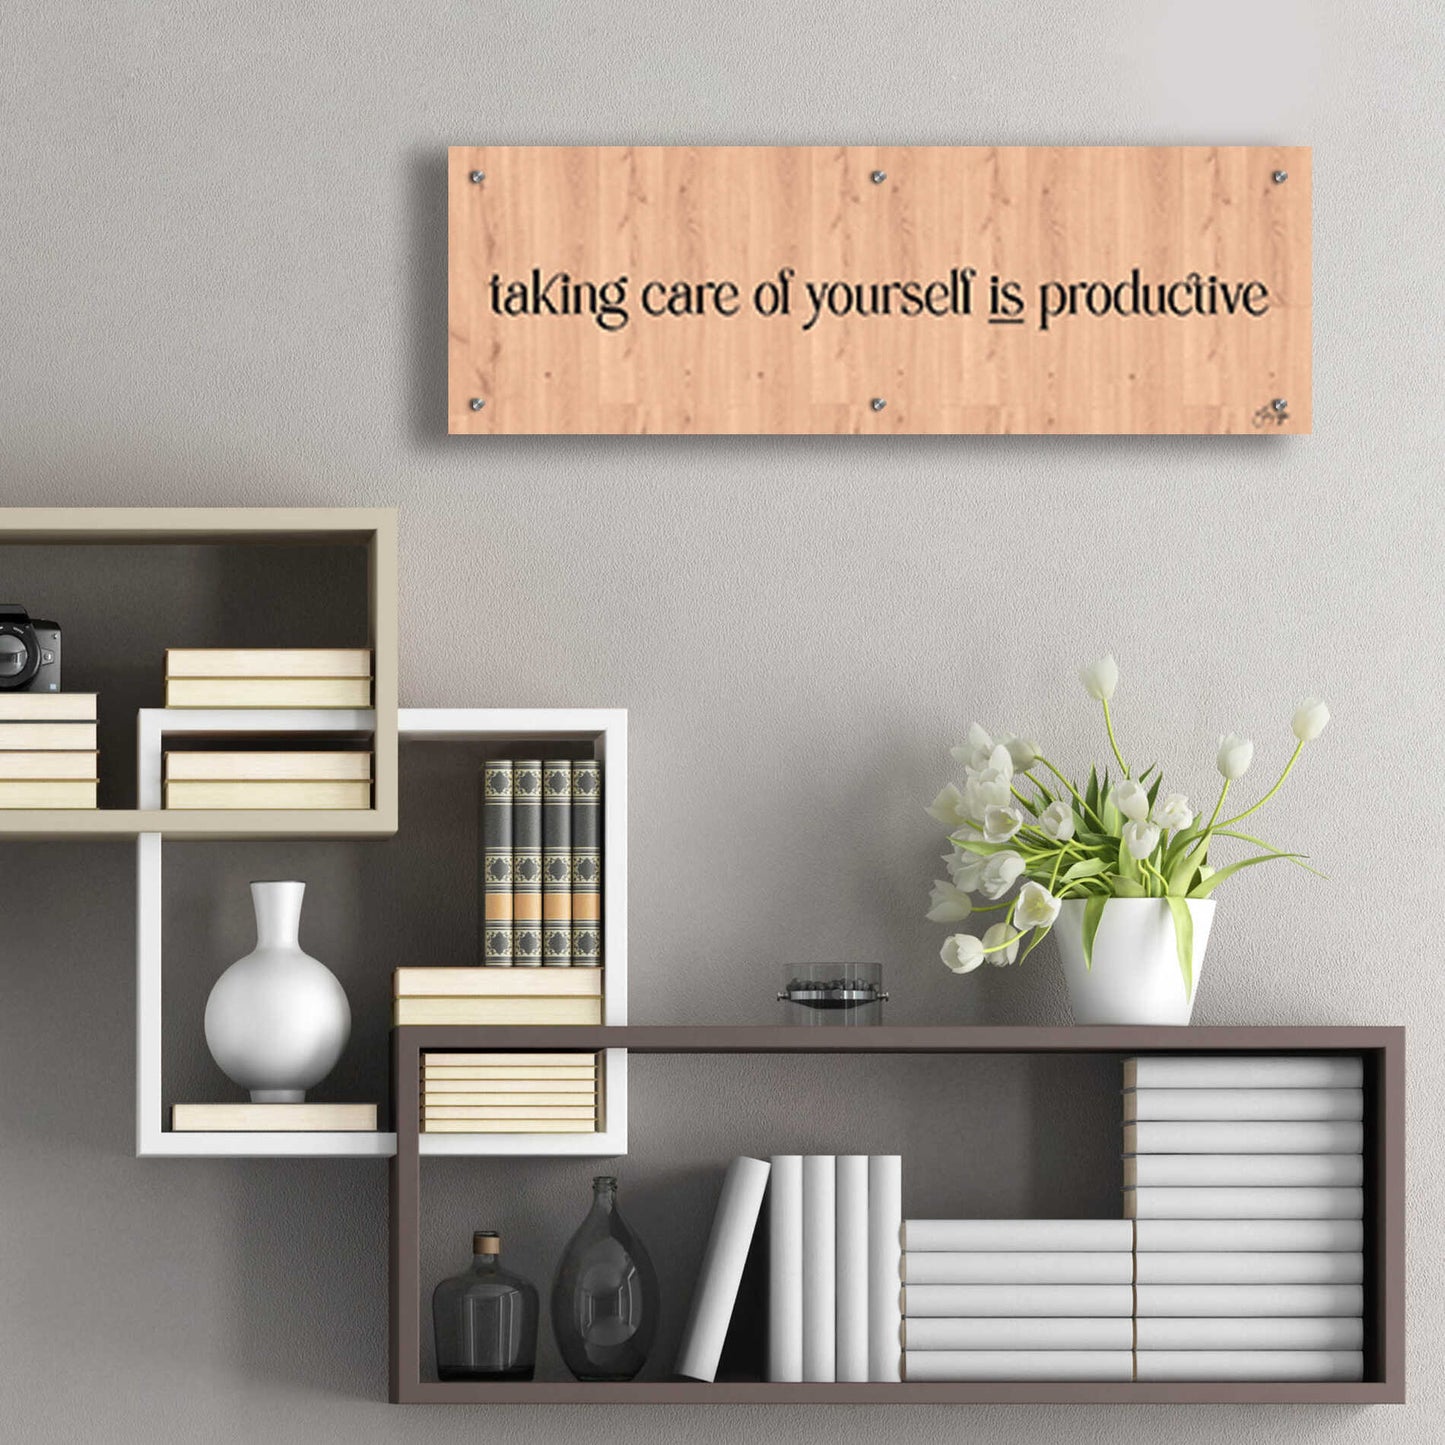 Epic Art 'Taking Care of Yourself is Productive' by Yass Naffas Designs, Acrylic Glass Wall Art,36x12